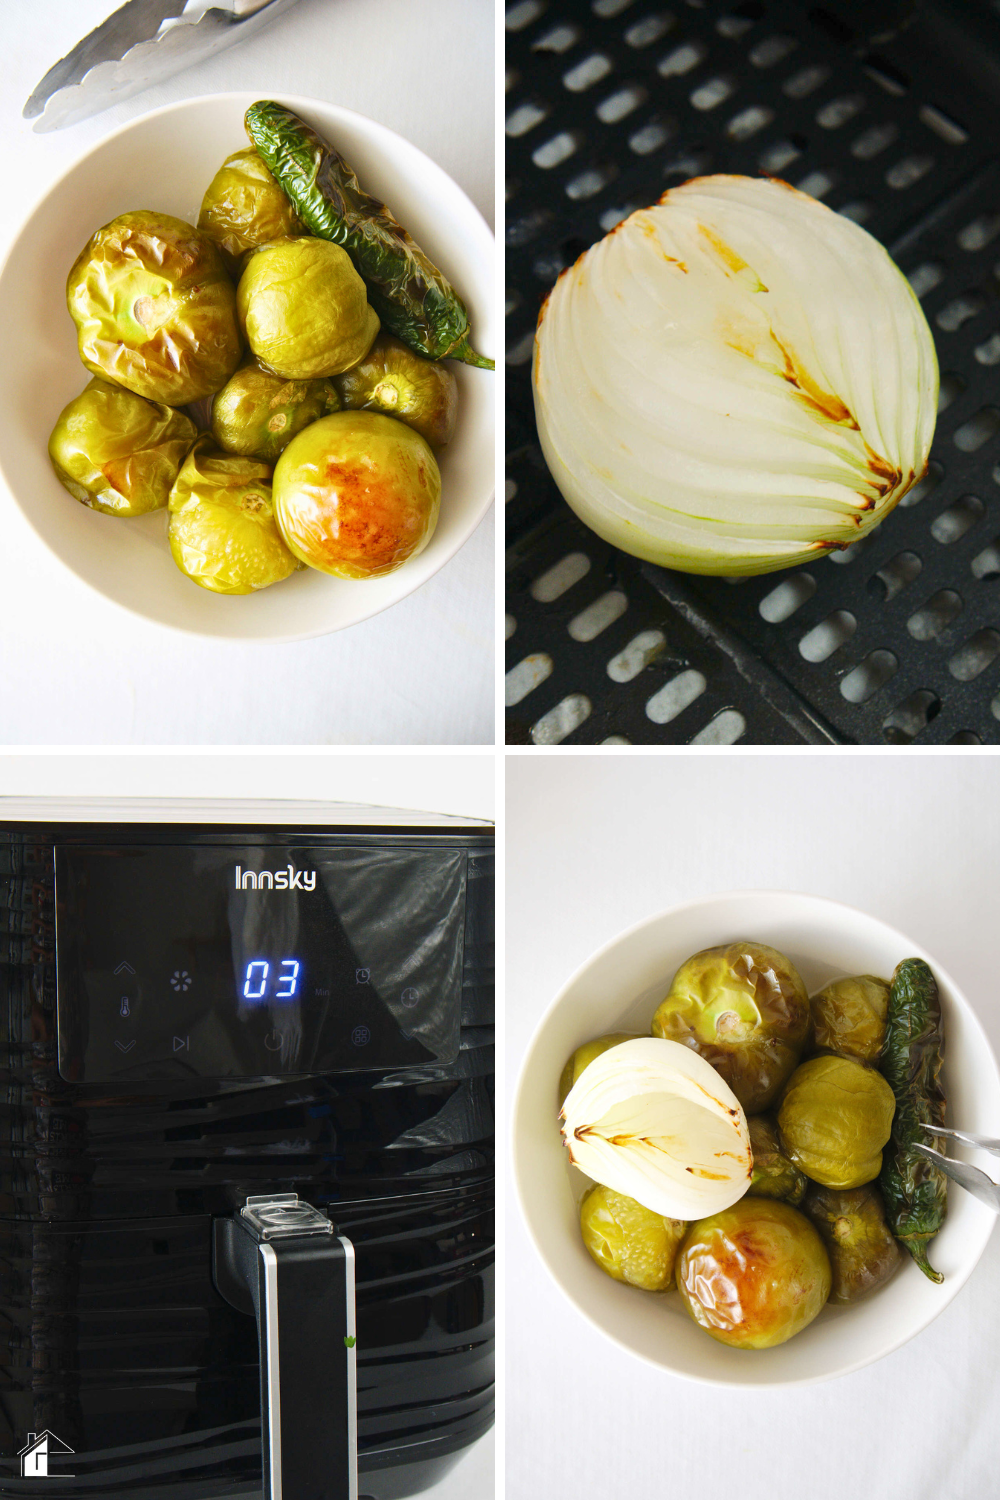 4 images showing steps of making salsa verde in an air fryer